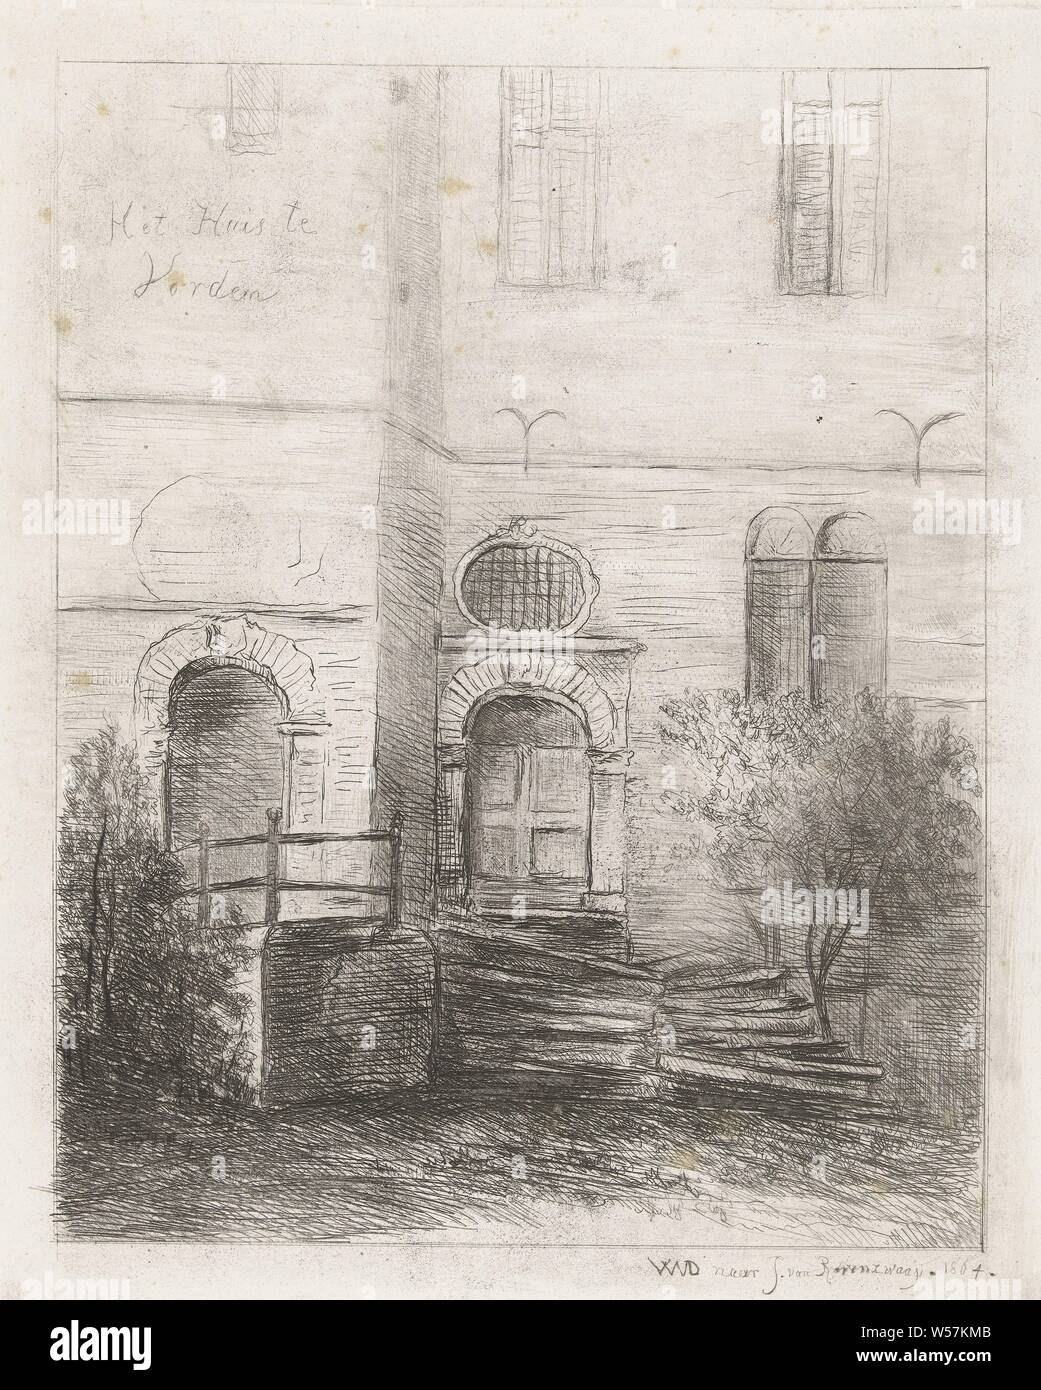 Facade of house in Vorden The House in Vorden (title on object), façade ( or house or building), Vorden, Willem Matthias Jan van Dielen (mentioned on object), Netherlands, 1864, paper, etching, h 308 mm × w 249 mm Stock Photo